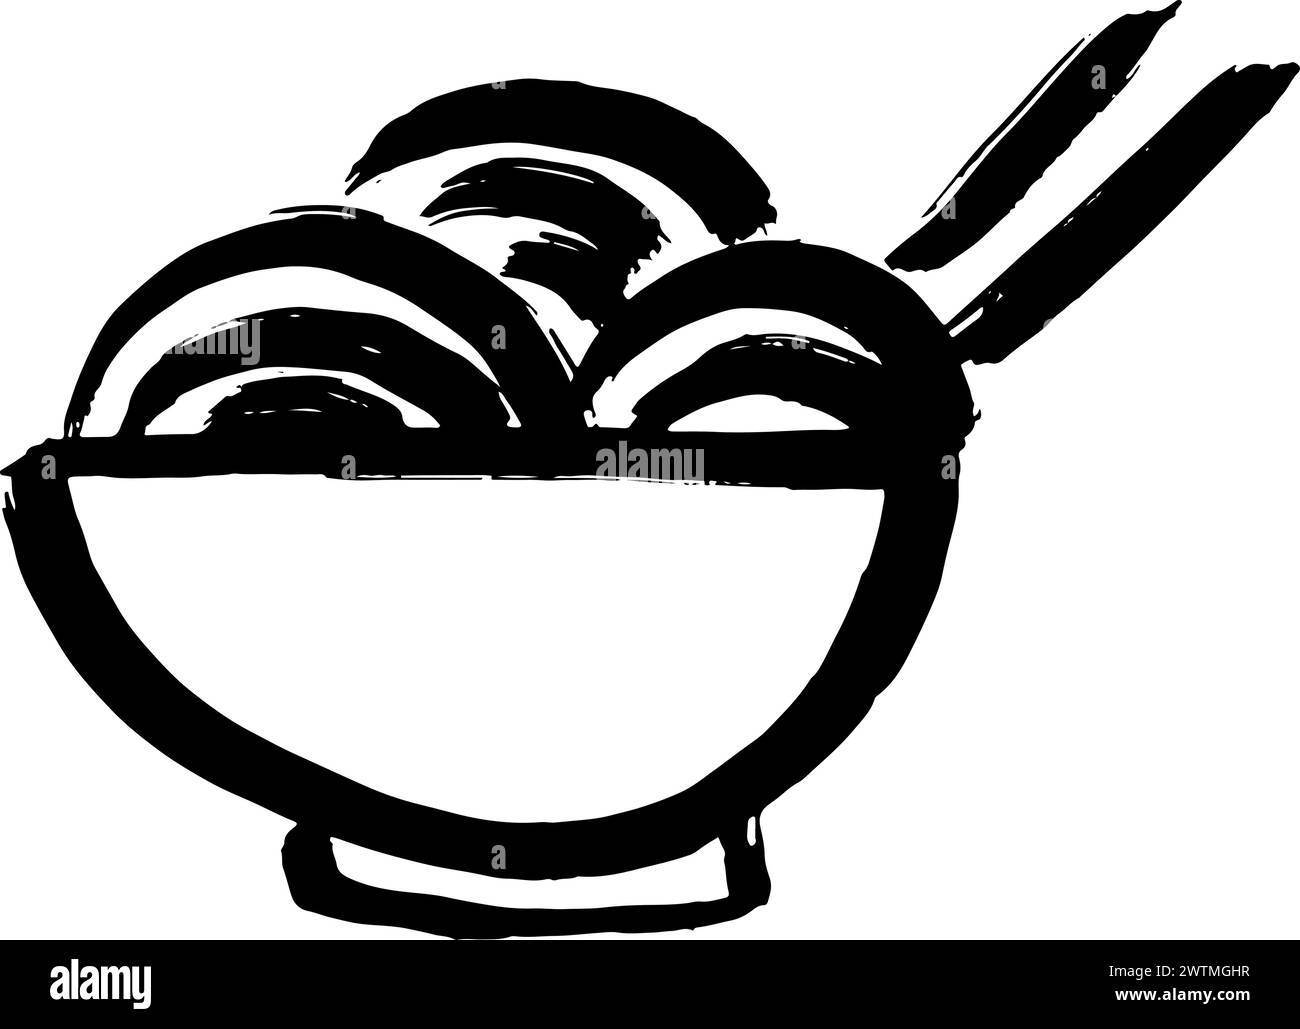 Dry Brush Noodles Cup Grunge Icon. Stock Vector